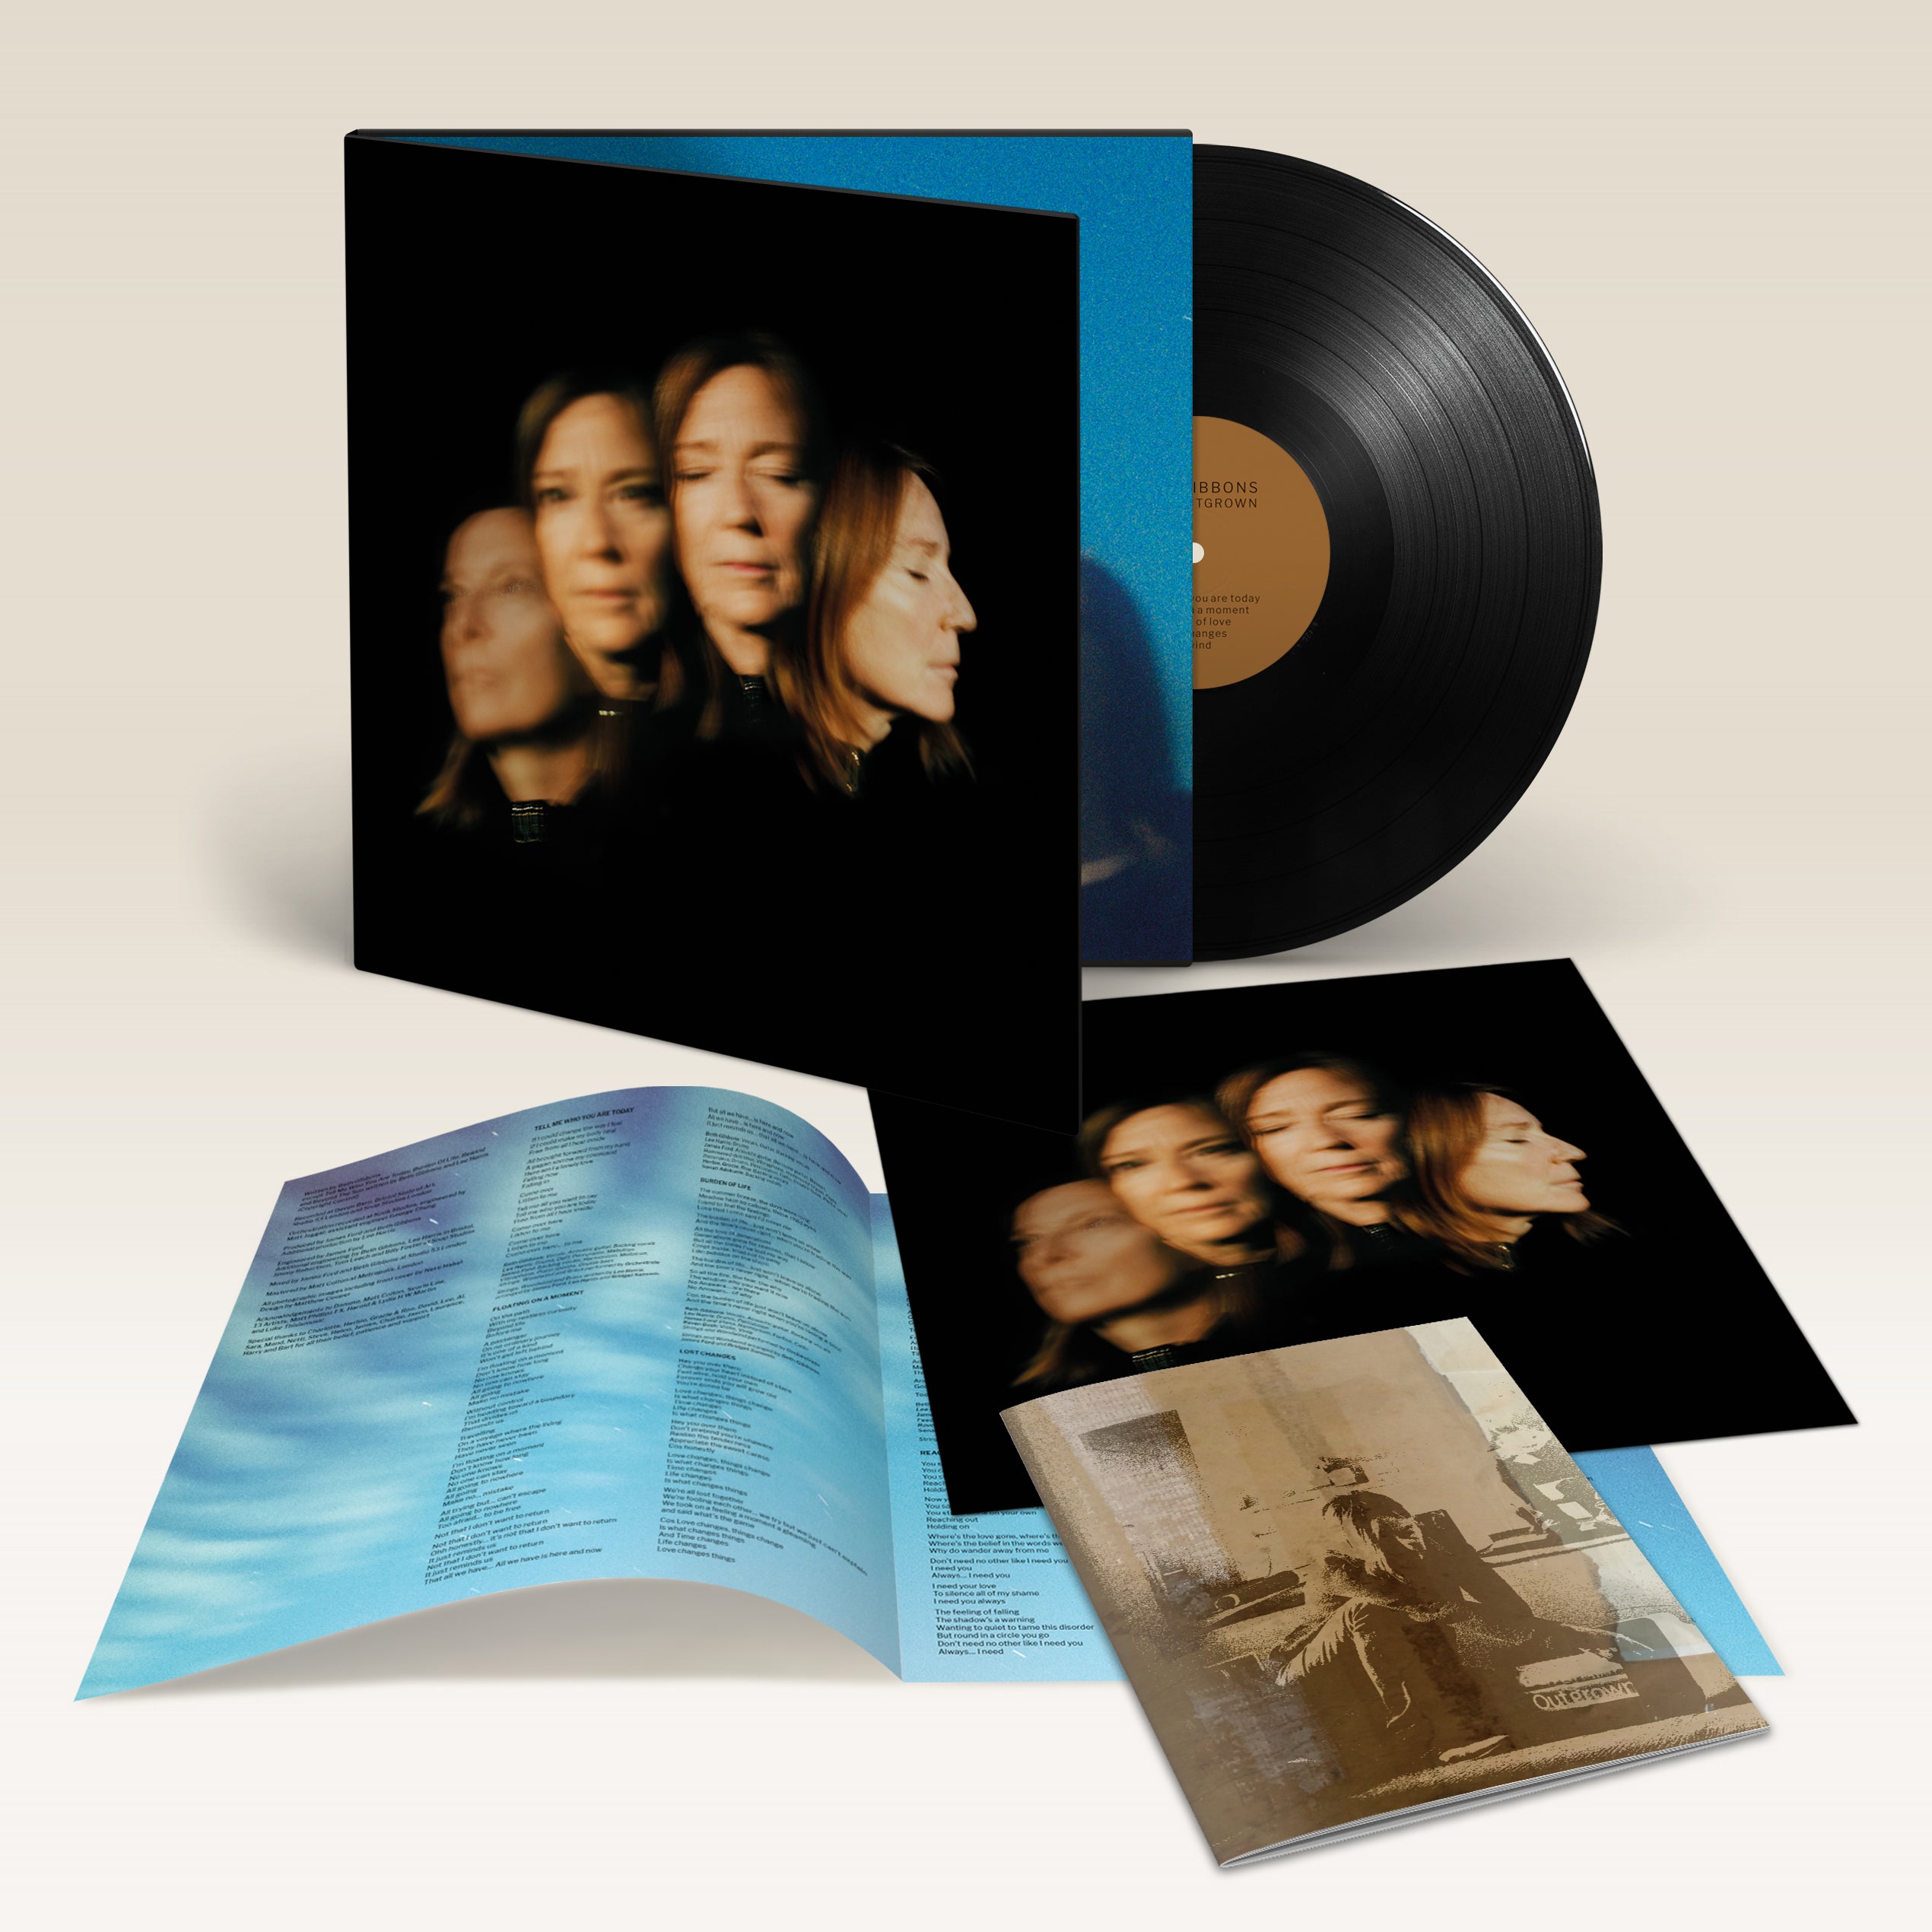 Beth Gibbons - Lives Outgrown: Limited Deluxe Vinyl LP (w/ 12-Page "Scrapbook" Booklet) + Exclusive Art Print